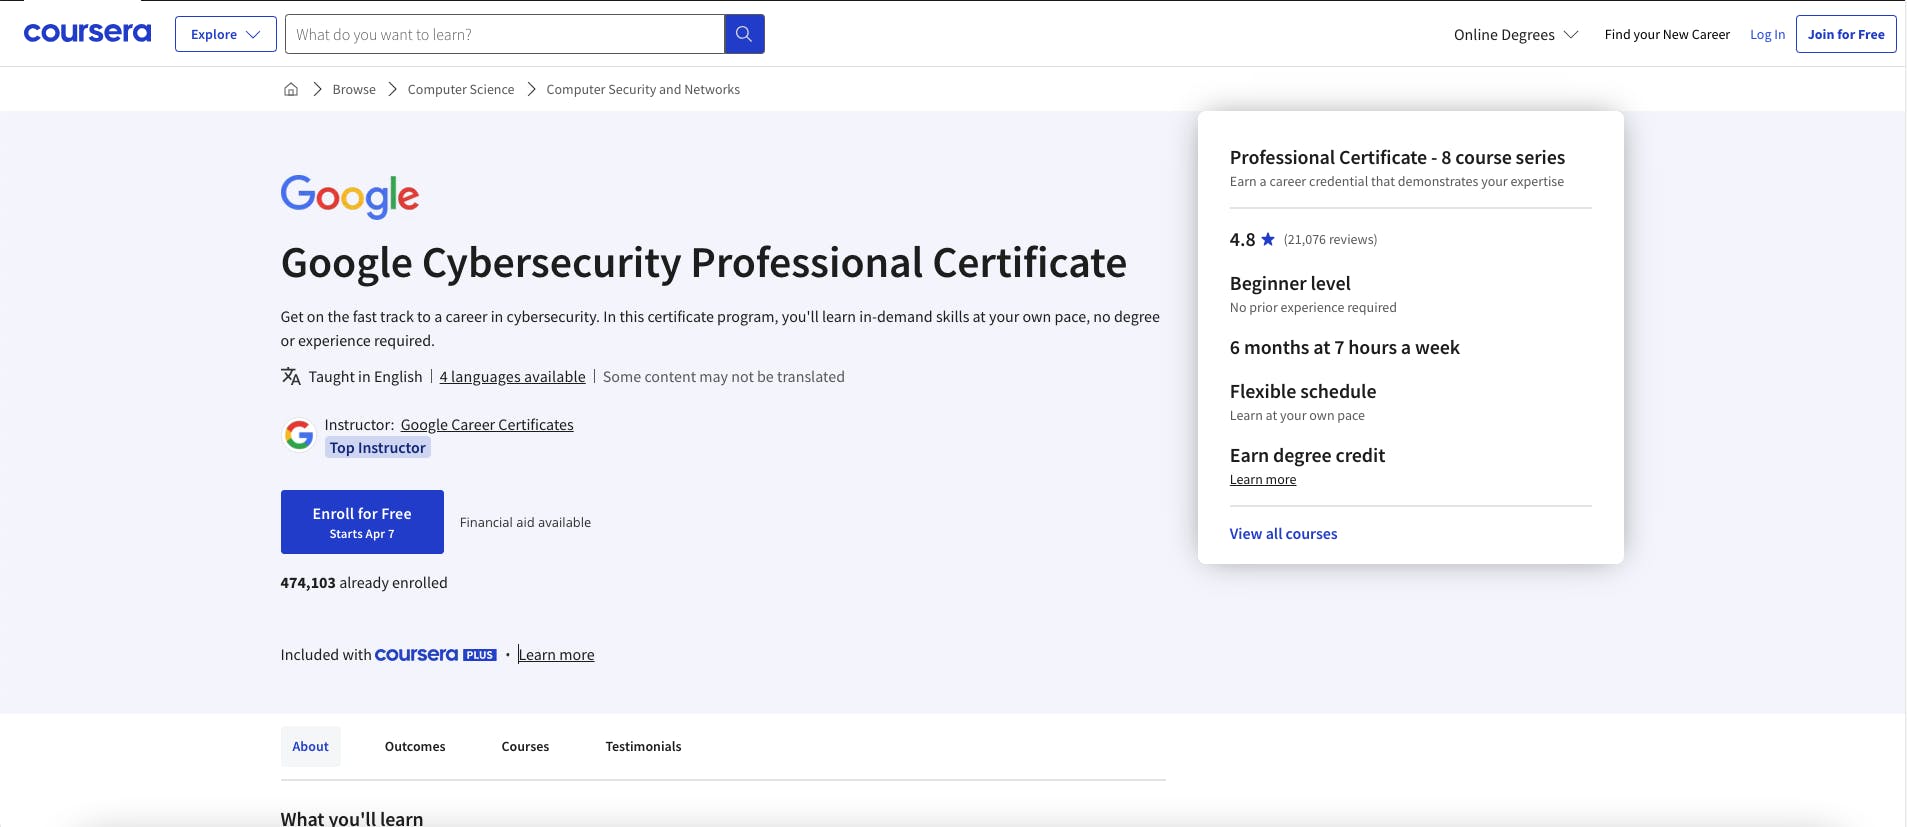 Coursera page for Google Cybersecurity Professional Certificate showing course details and enrollment options